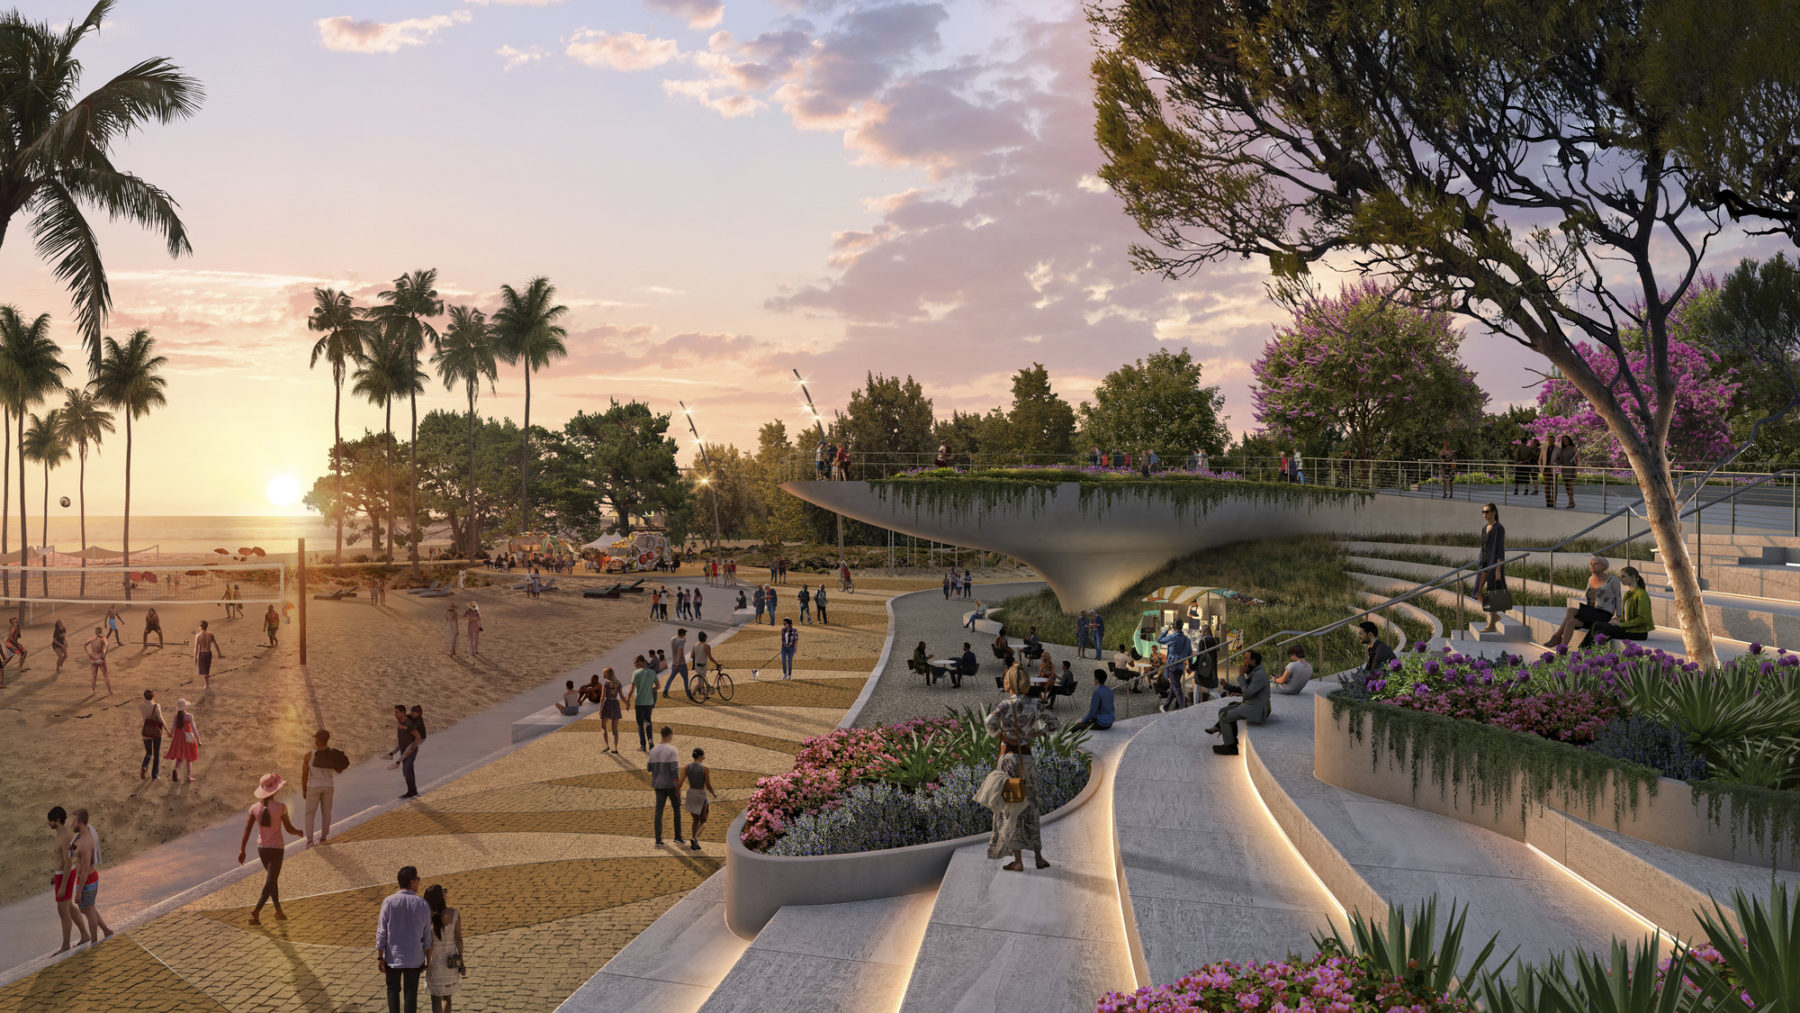 rendering of amphitheater and pedestrian bridge. The sun is setting on the left hand side of the image. People walk on a path in the foreground.